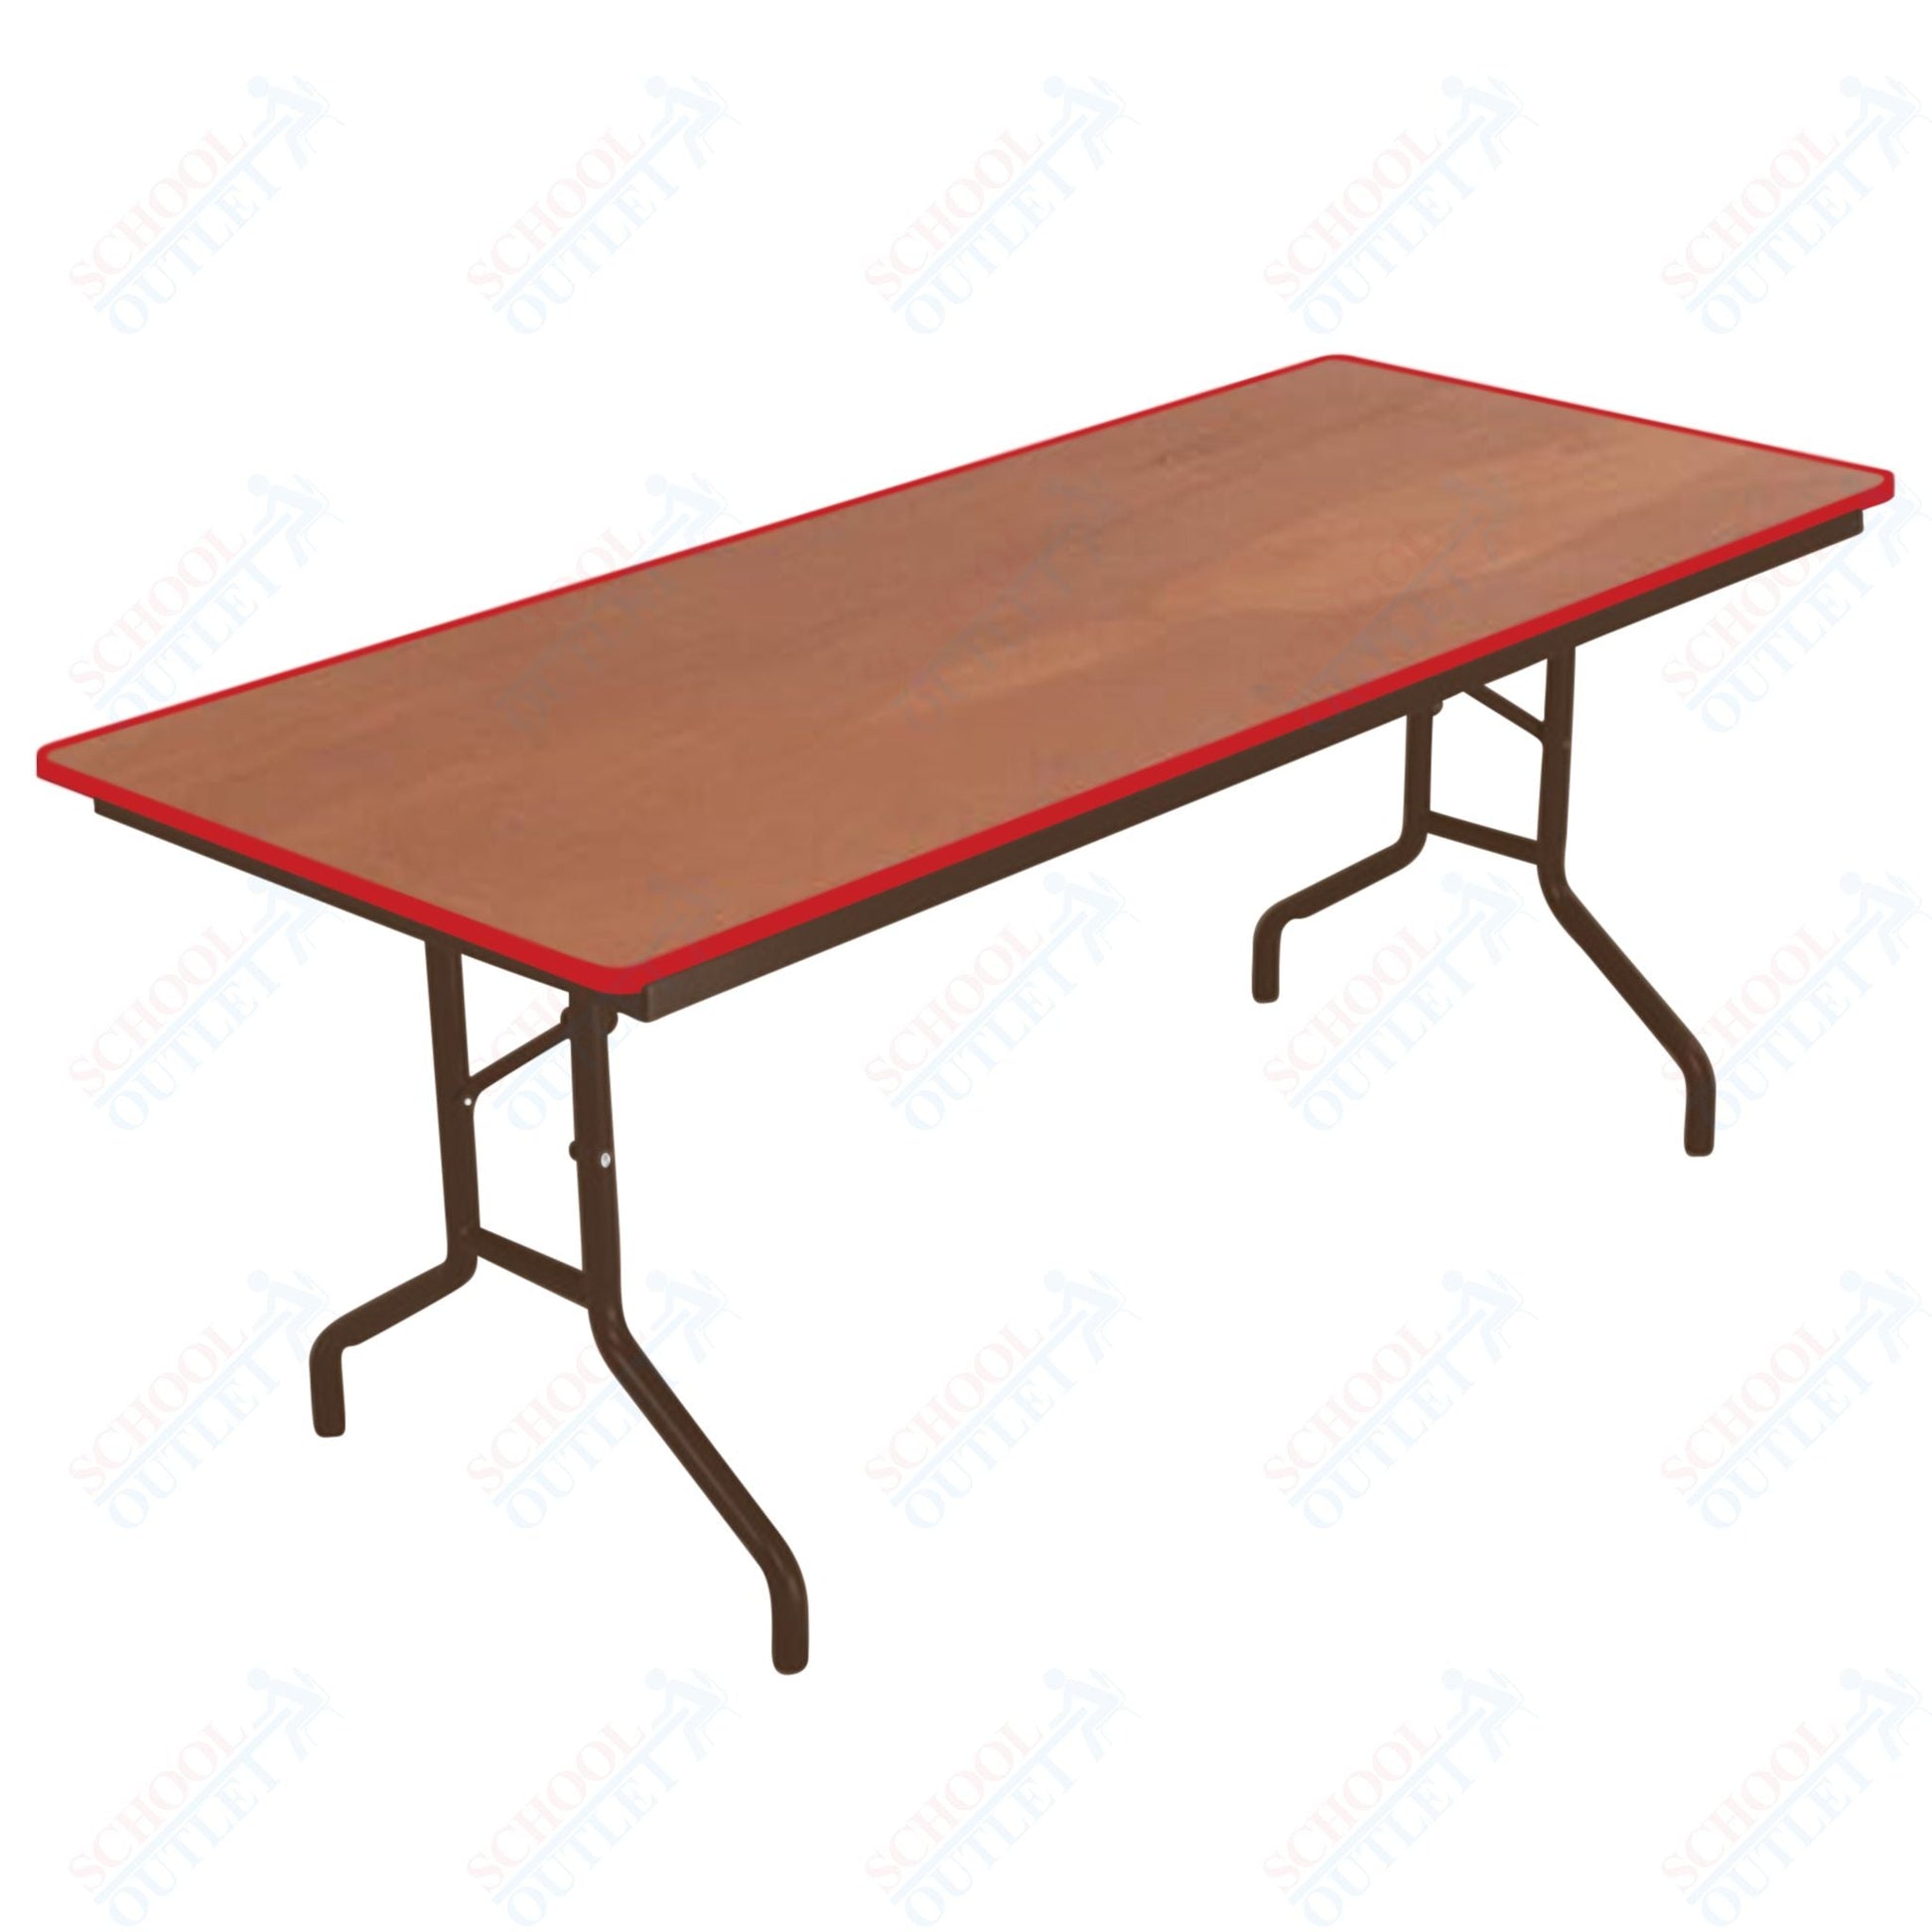 AmTab Folding Table - Plywood Stained and Sealed - Vinyl T - Molding Edge - 30"W x 60"L x 29"H (AmTab AMT - 305PM) - SchoolOutlet